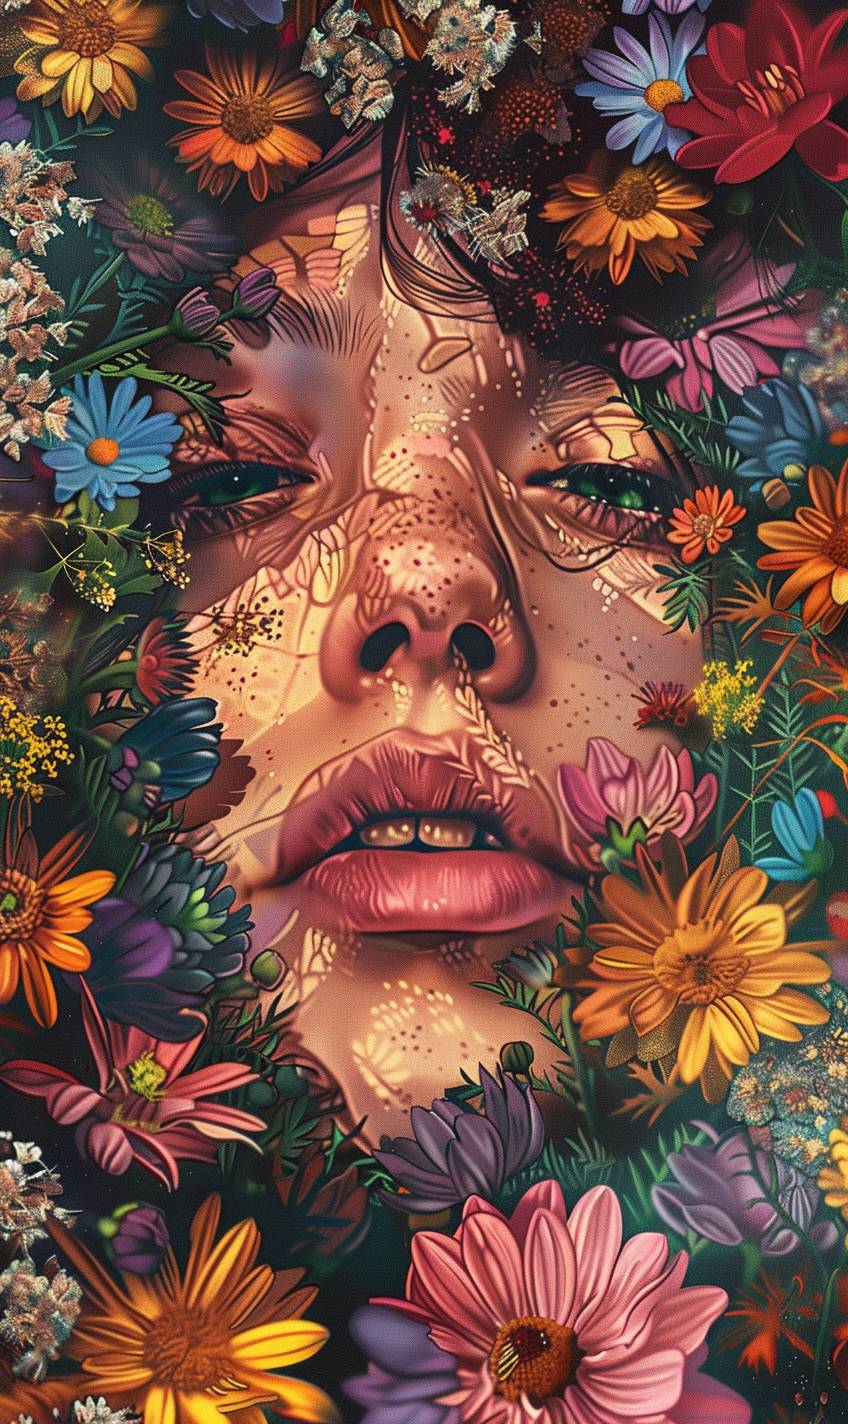 Boho style wall art, close up of SUBJECT's face, surrounded by colorful flowers, hippie aesthetic, digital illustration